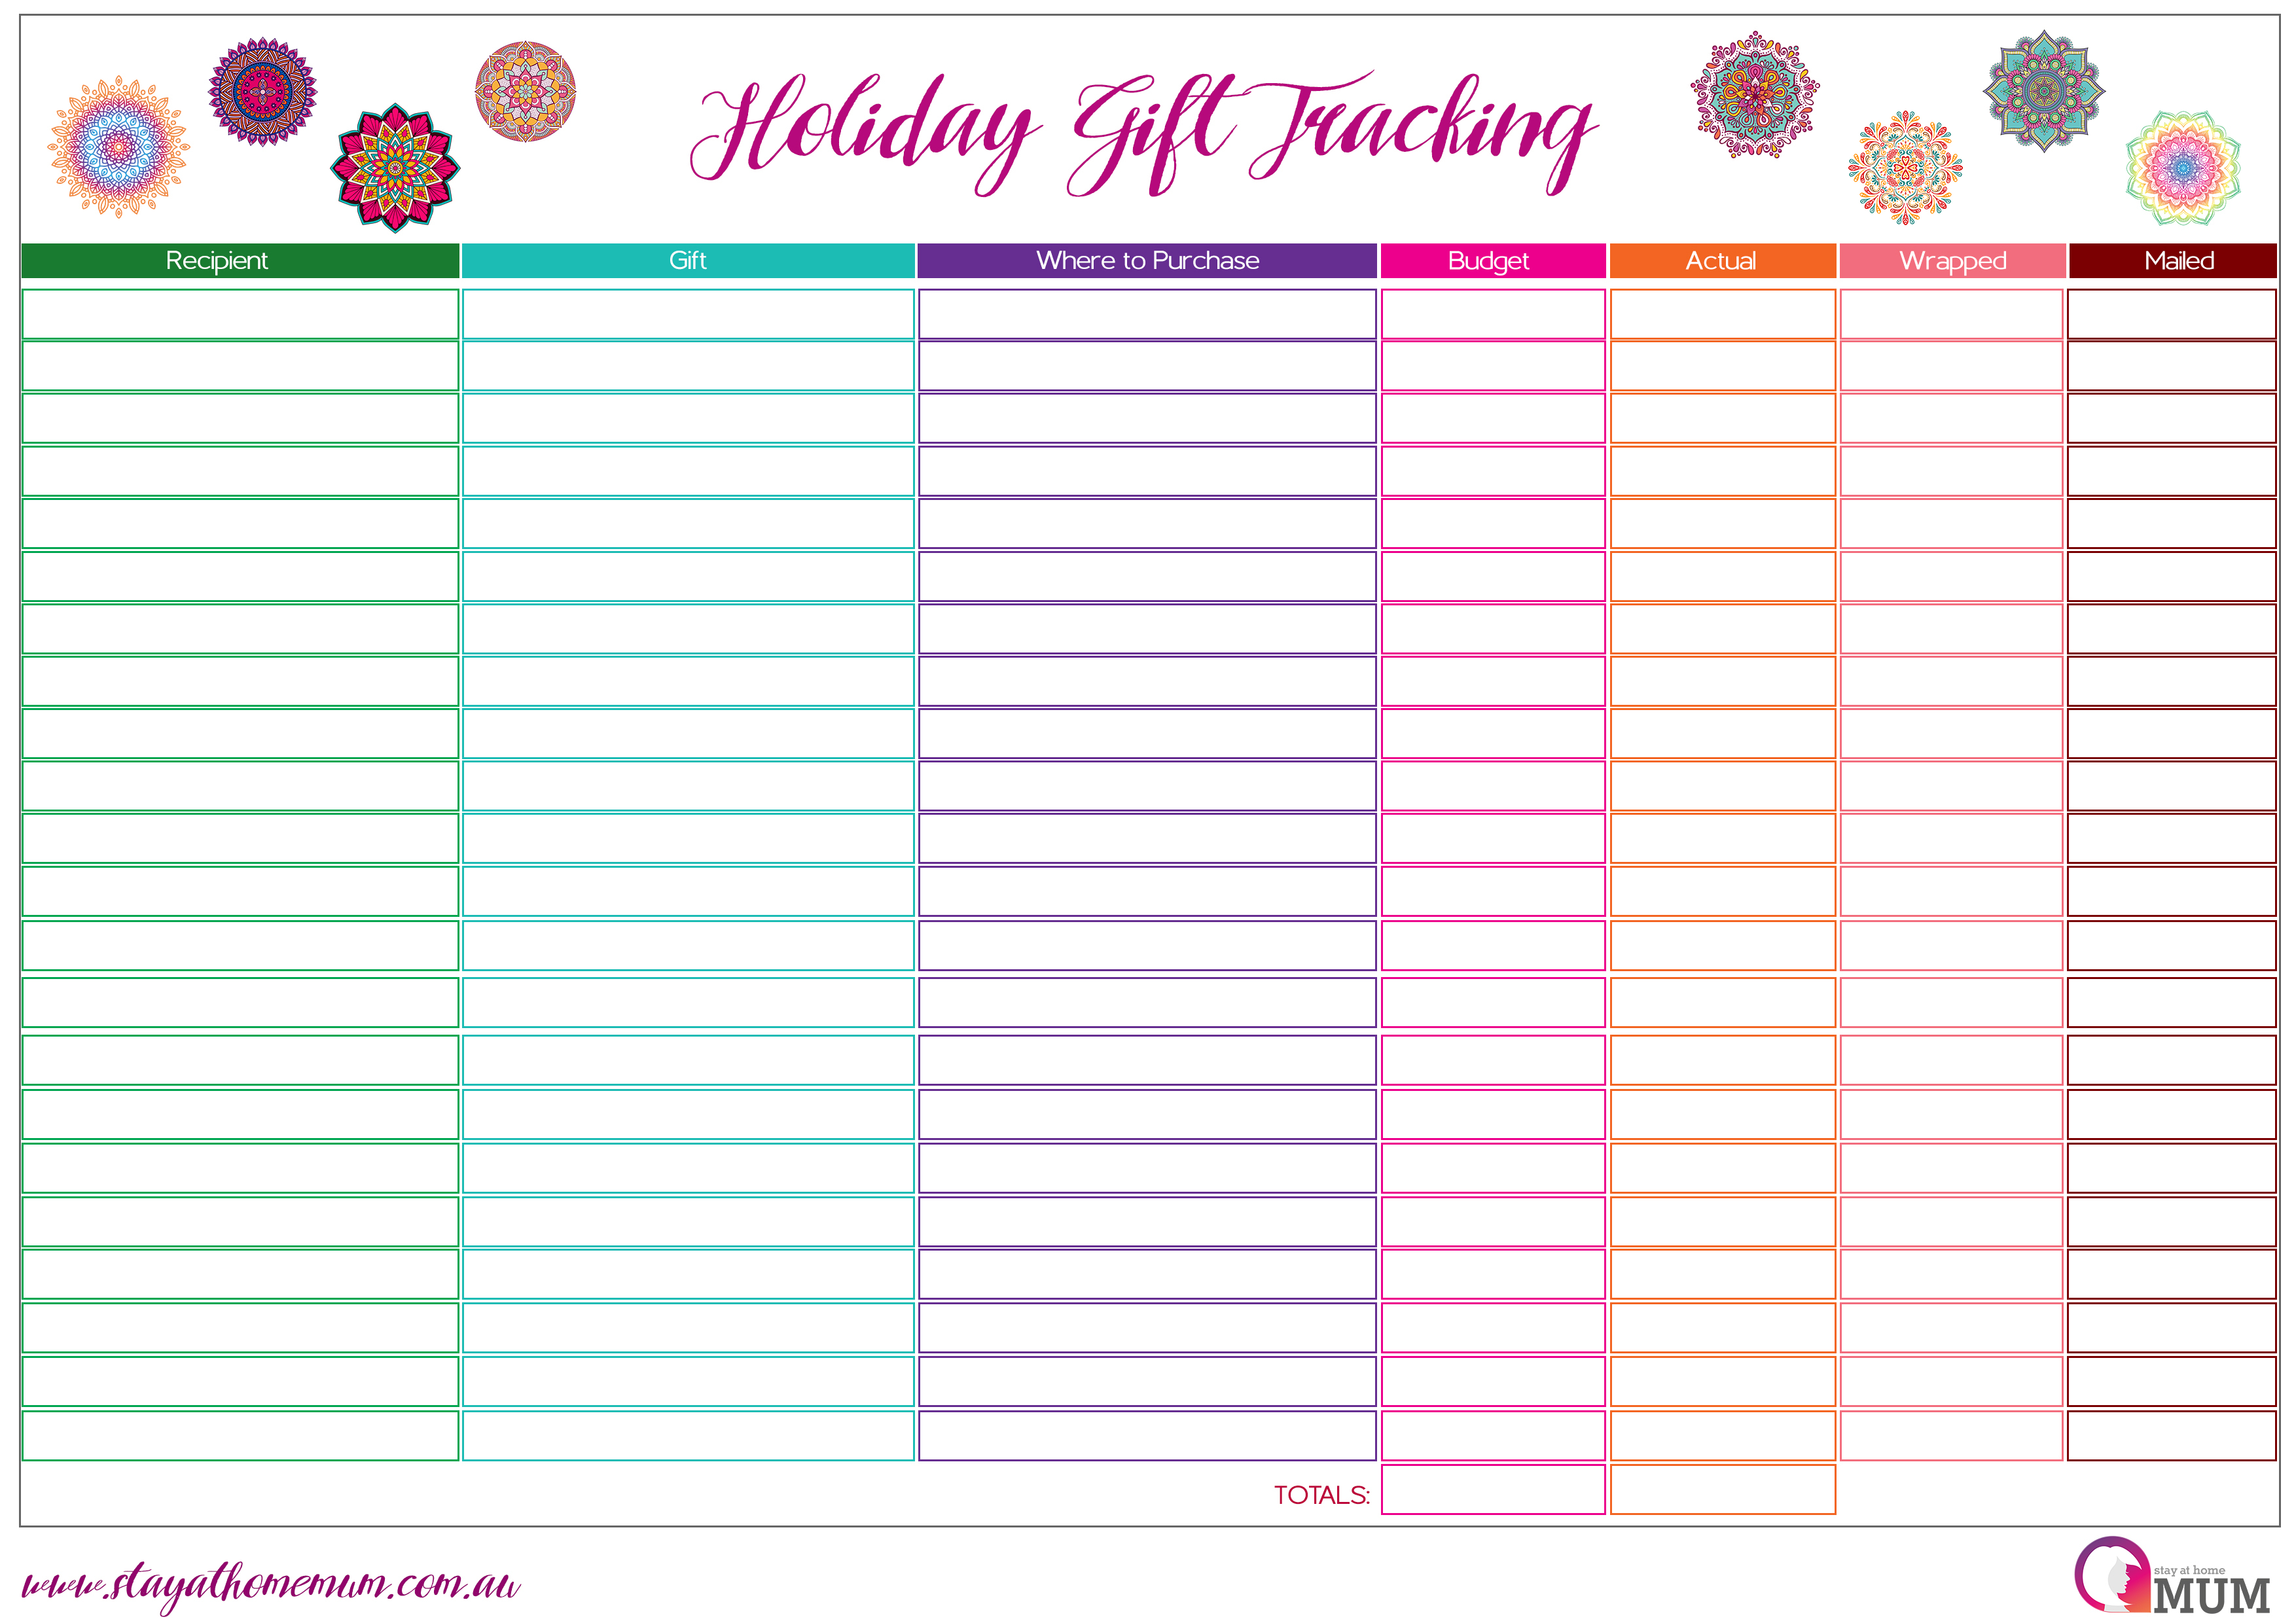 Christmas Present Spreadsheet With Regard To Holiday Gift Tracking Spreadsheet